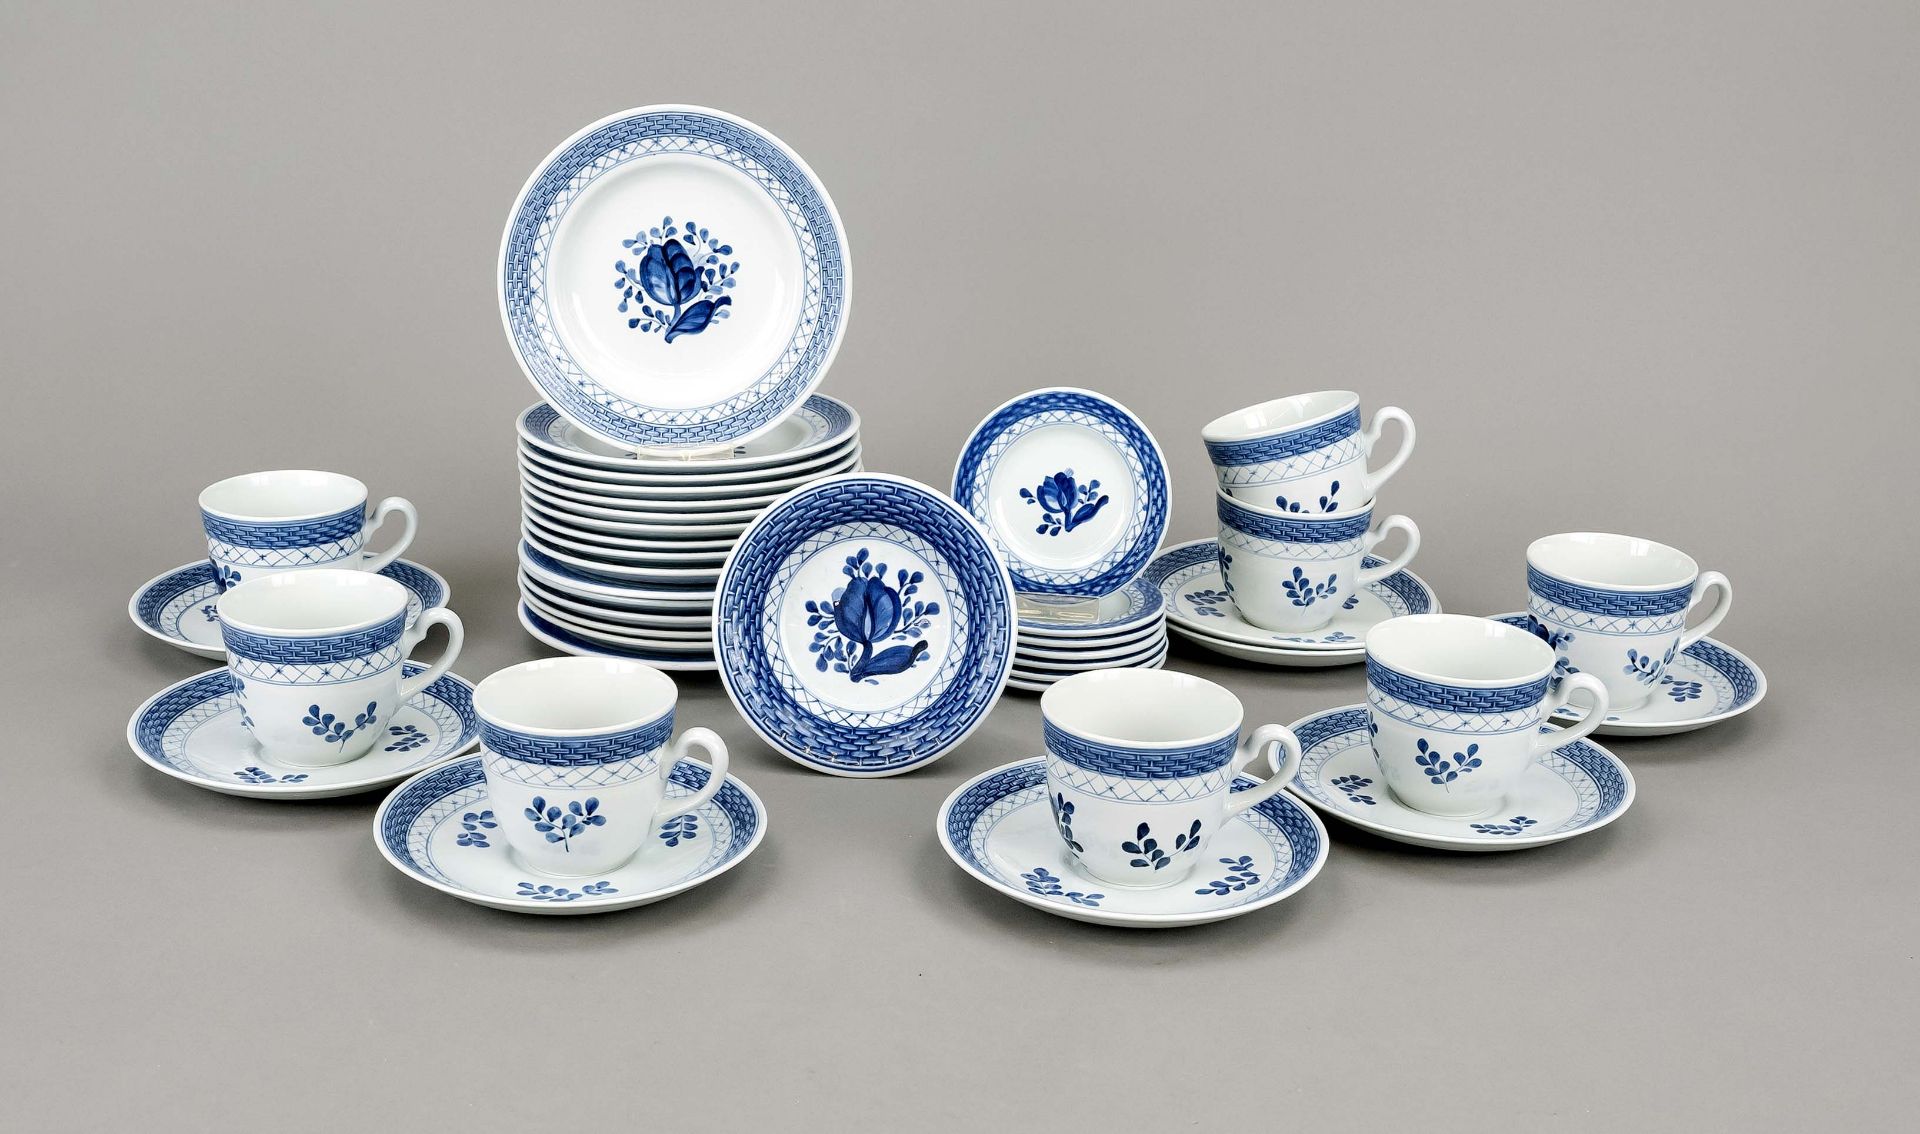 Coffee service for 8 persons, 40-piece, Aluminia faience, Royal Copenhagen, late 20th century, '